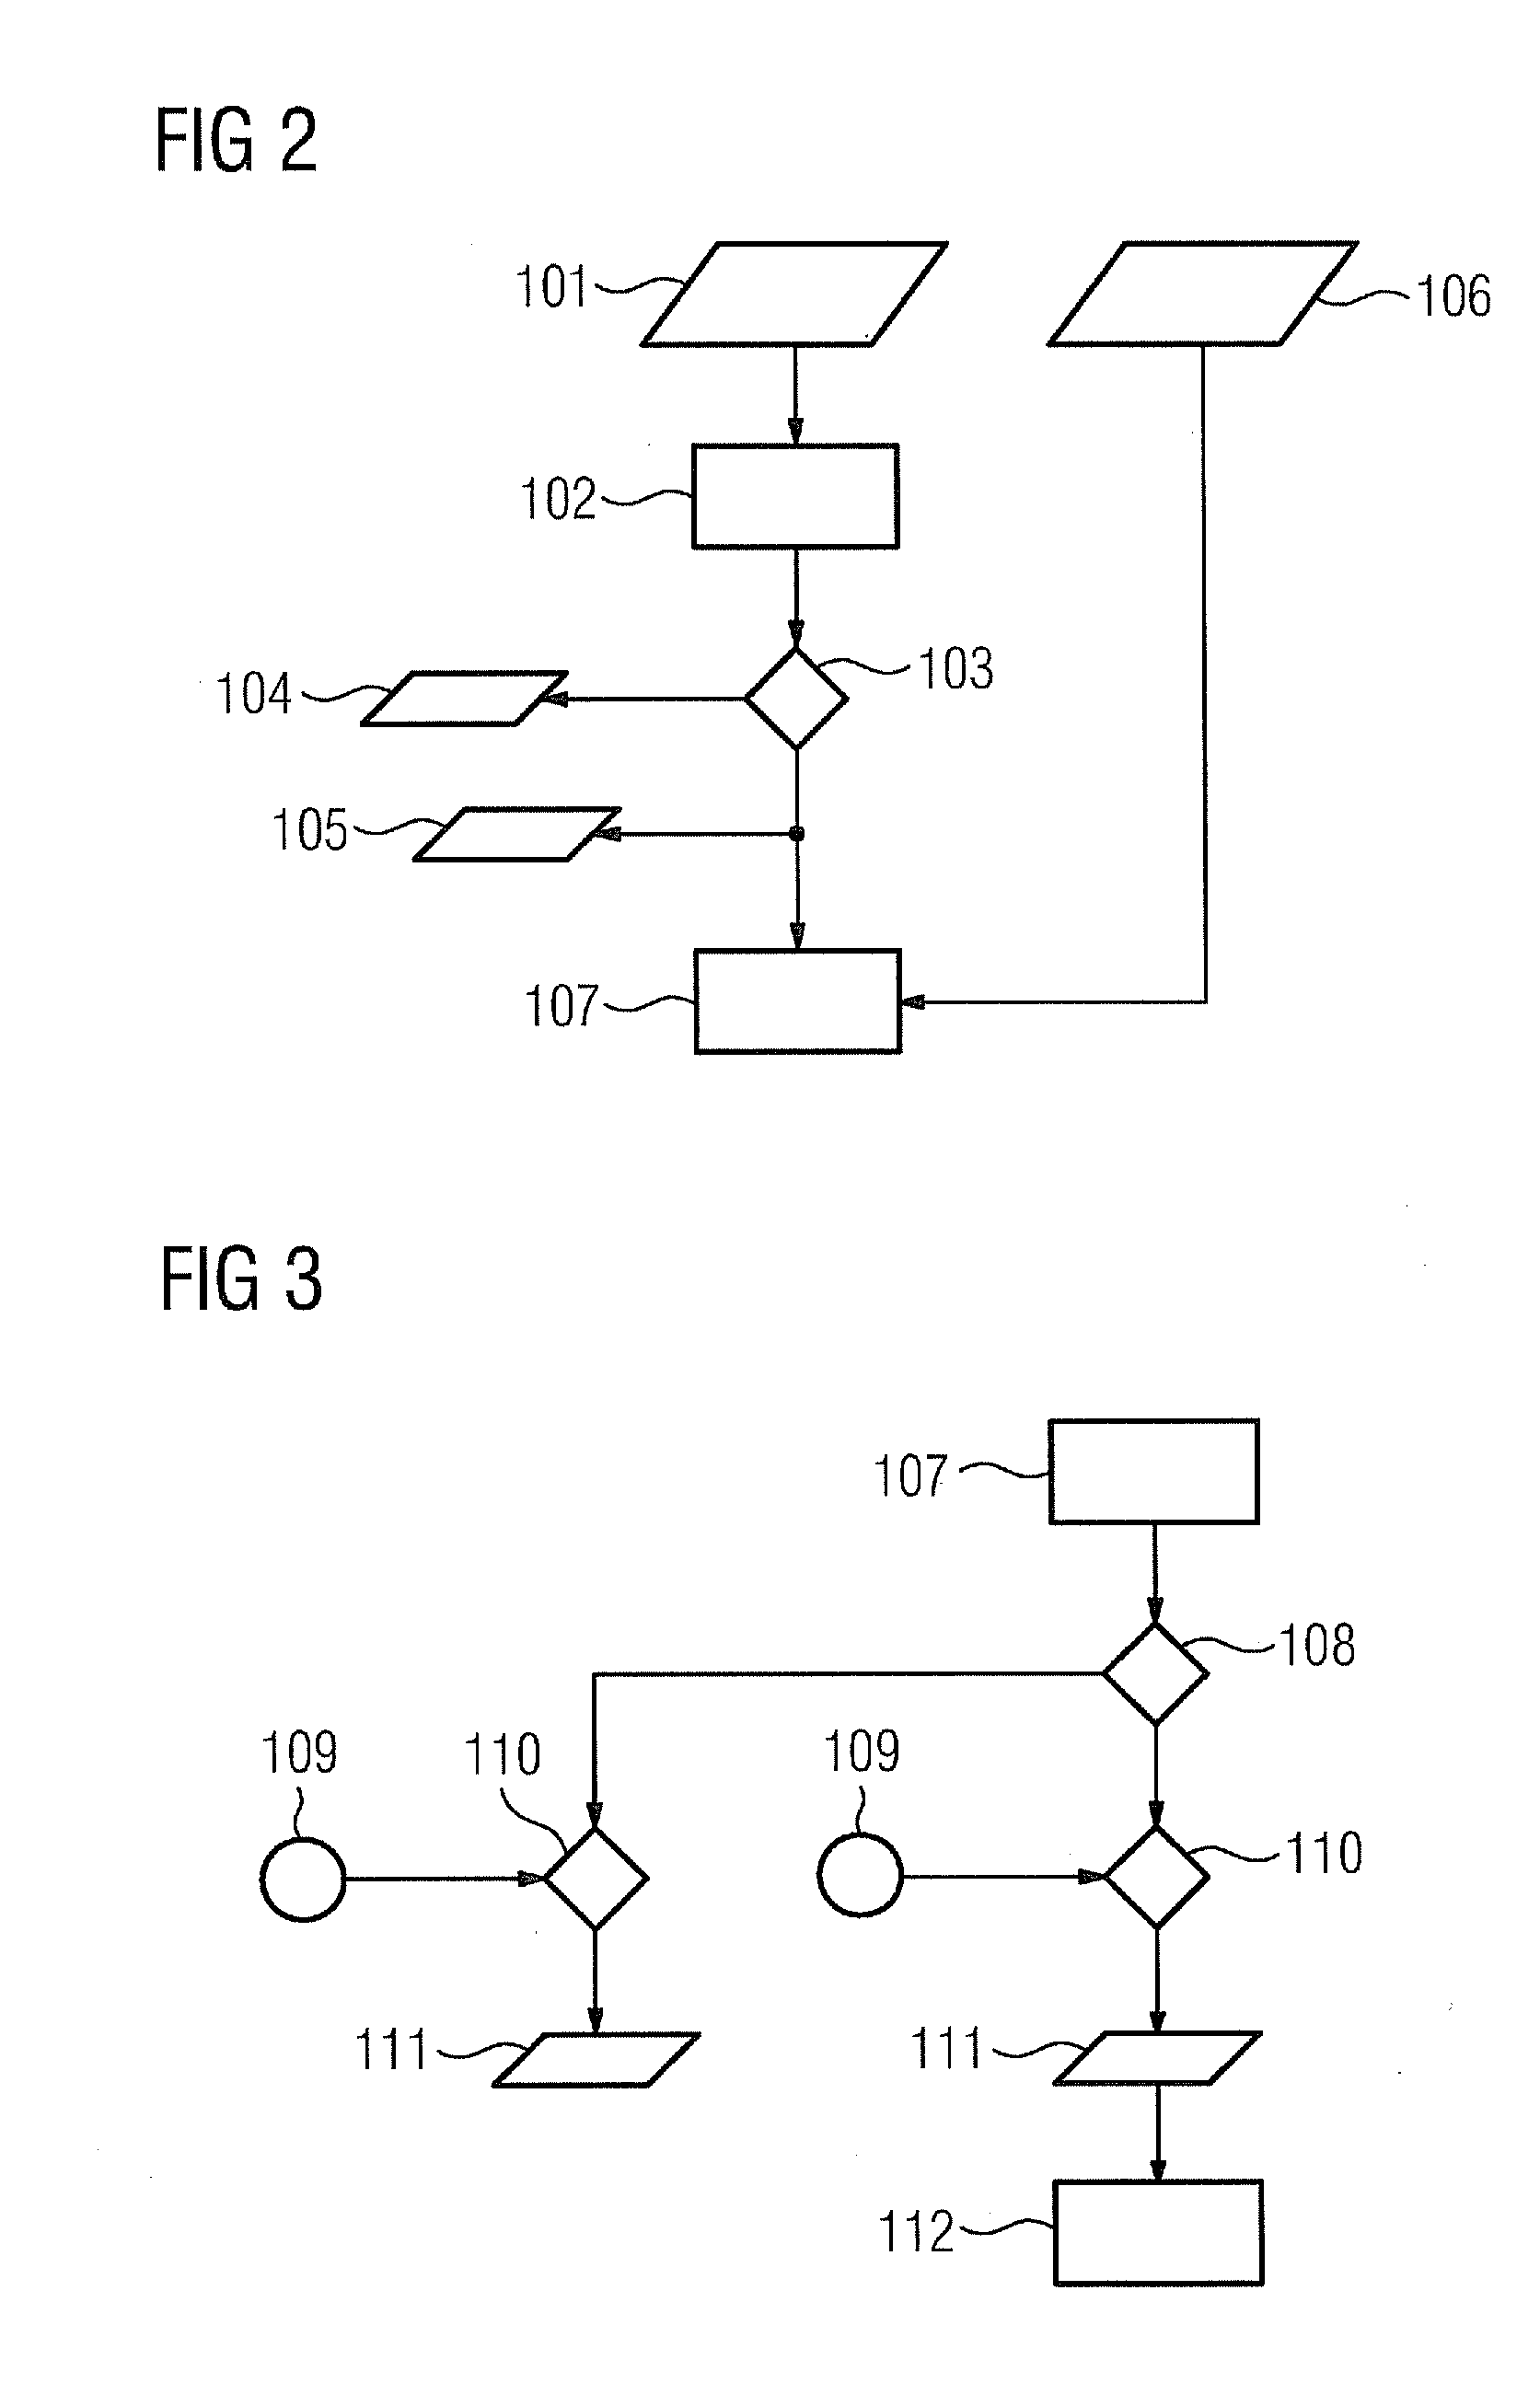 Method for the uninterrupted operation of a gas liquefaction system